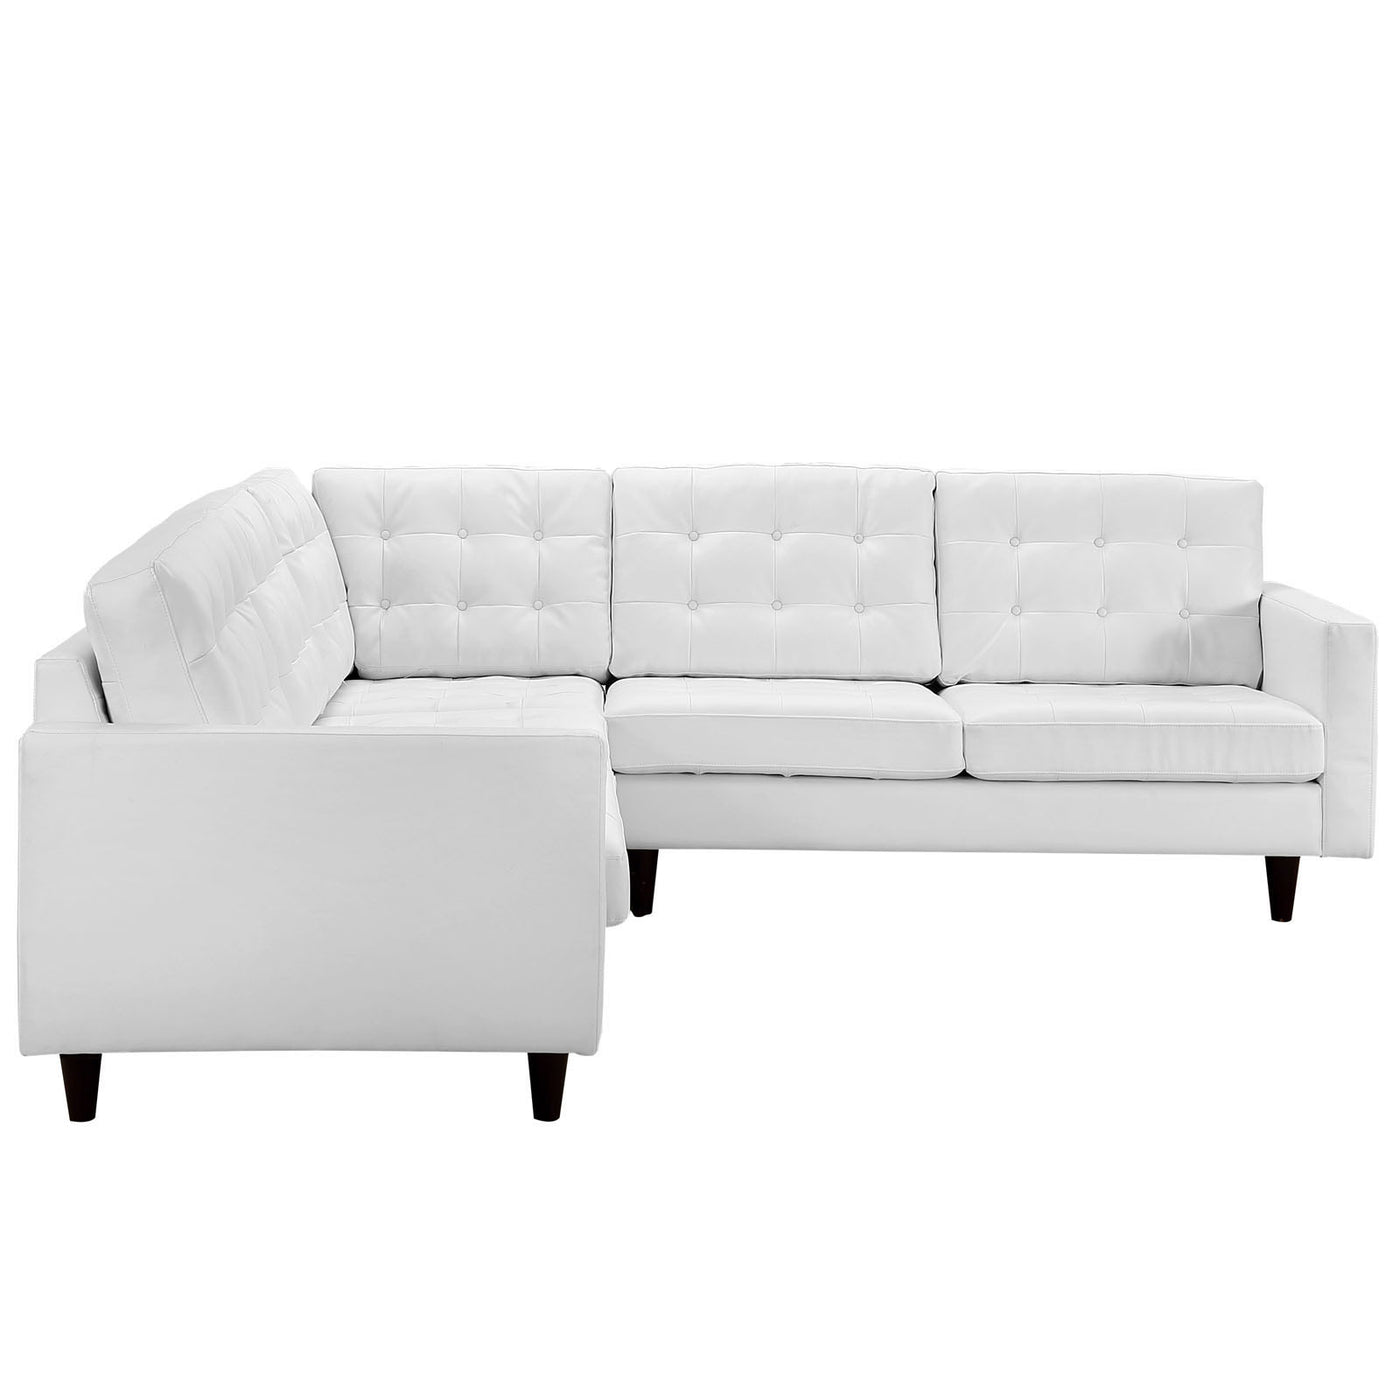 Era L-Shaped Leather Sectional Sofa White - Froy.com